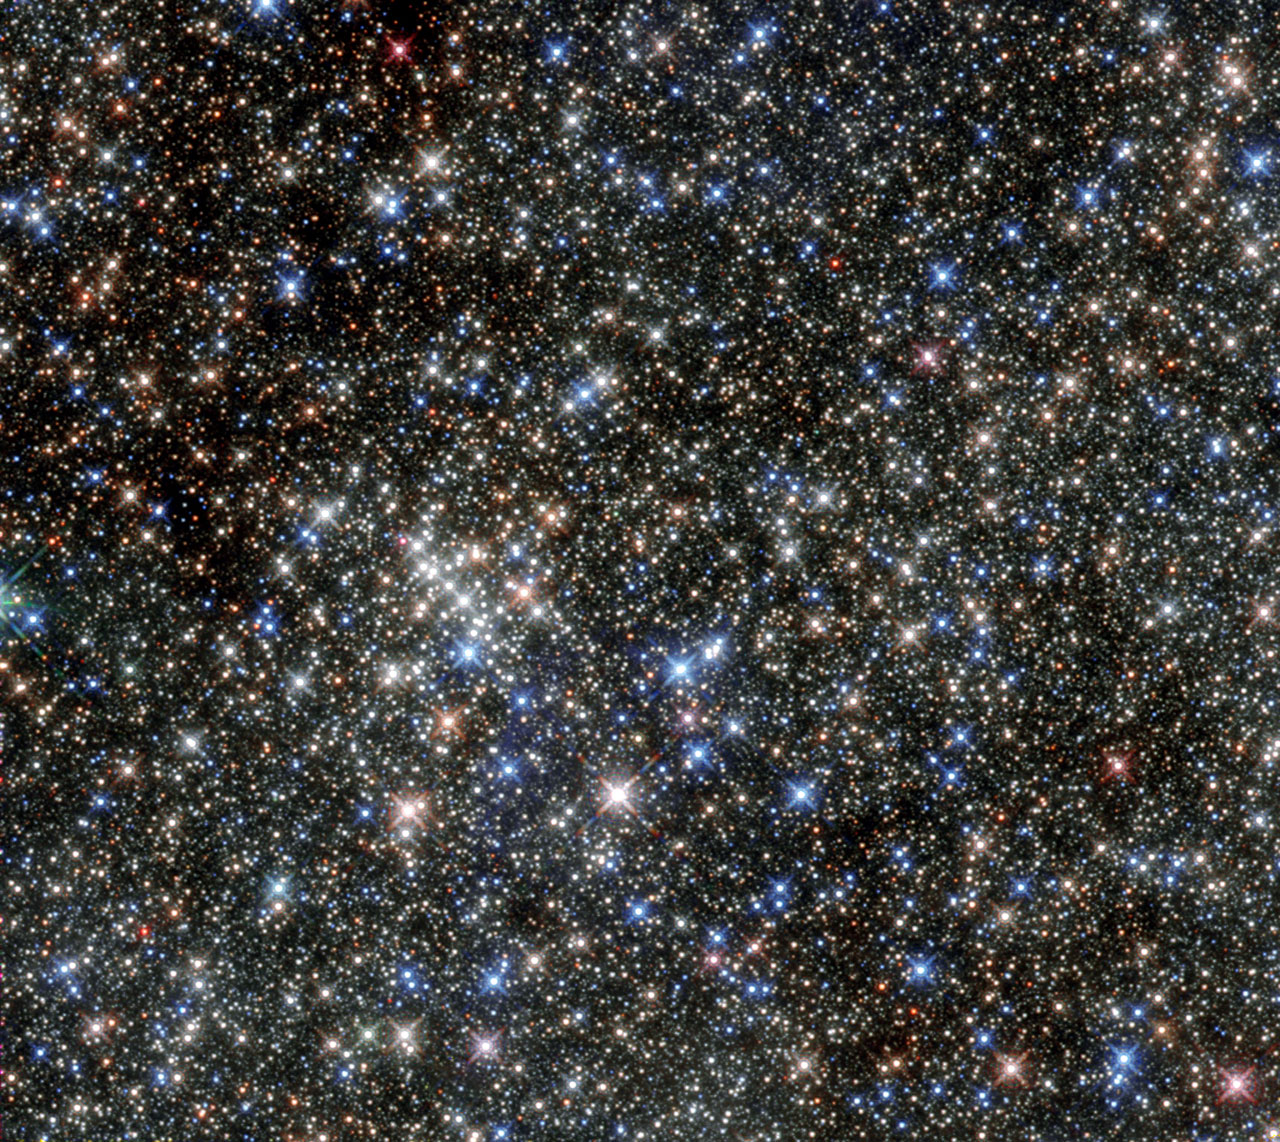 Webb's Observations Reveal a Diverse Collection of Lensed Galaxies Behind the 'El Gordo' Cluster